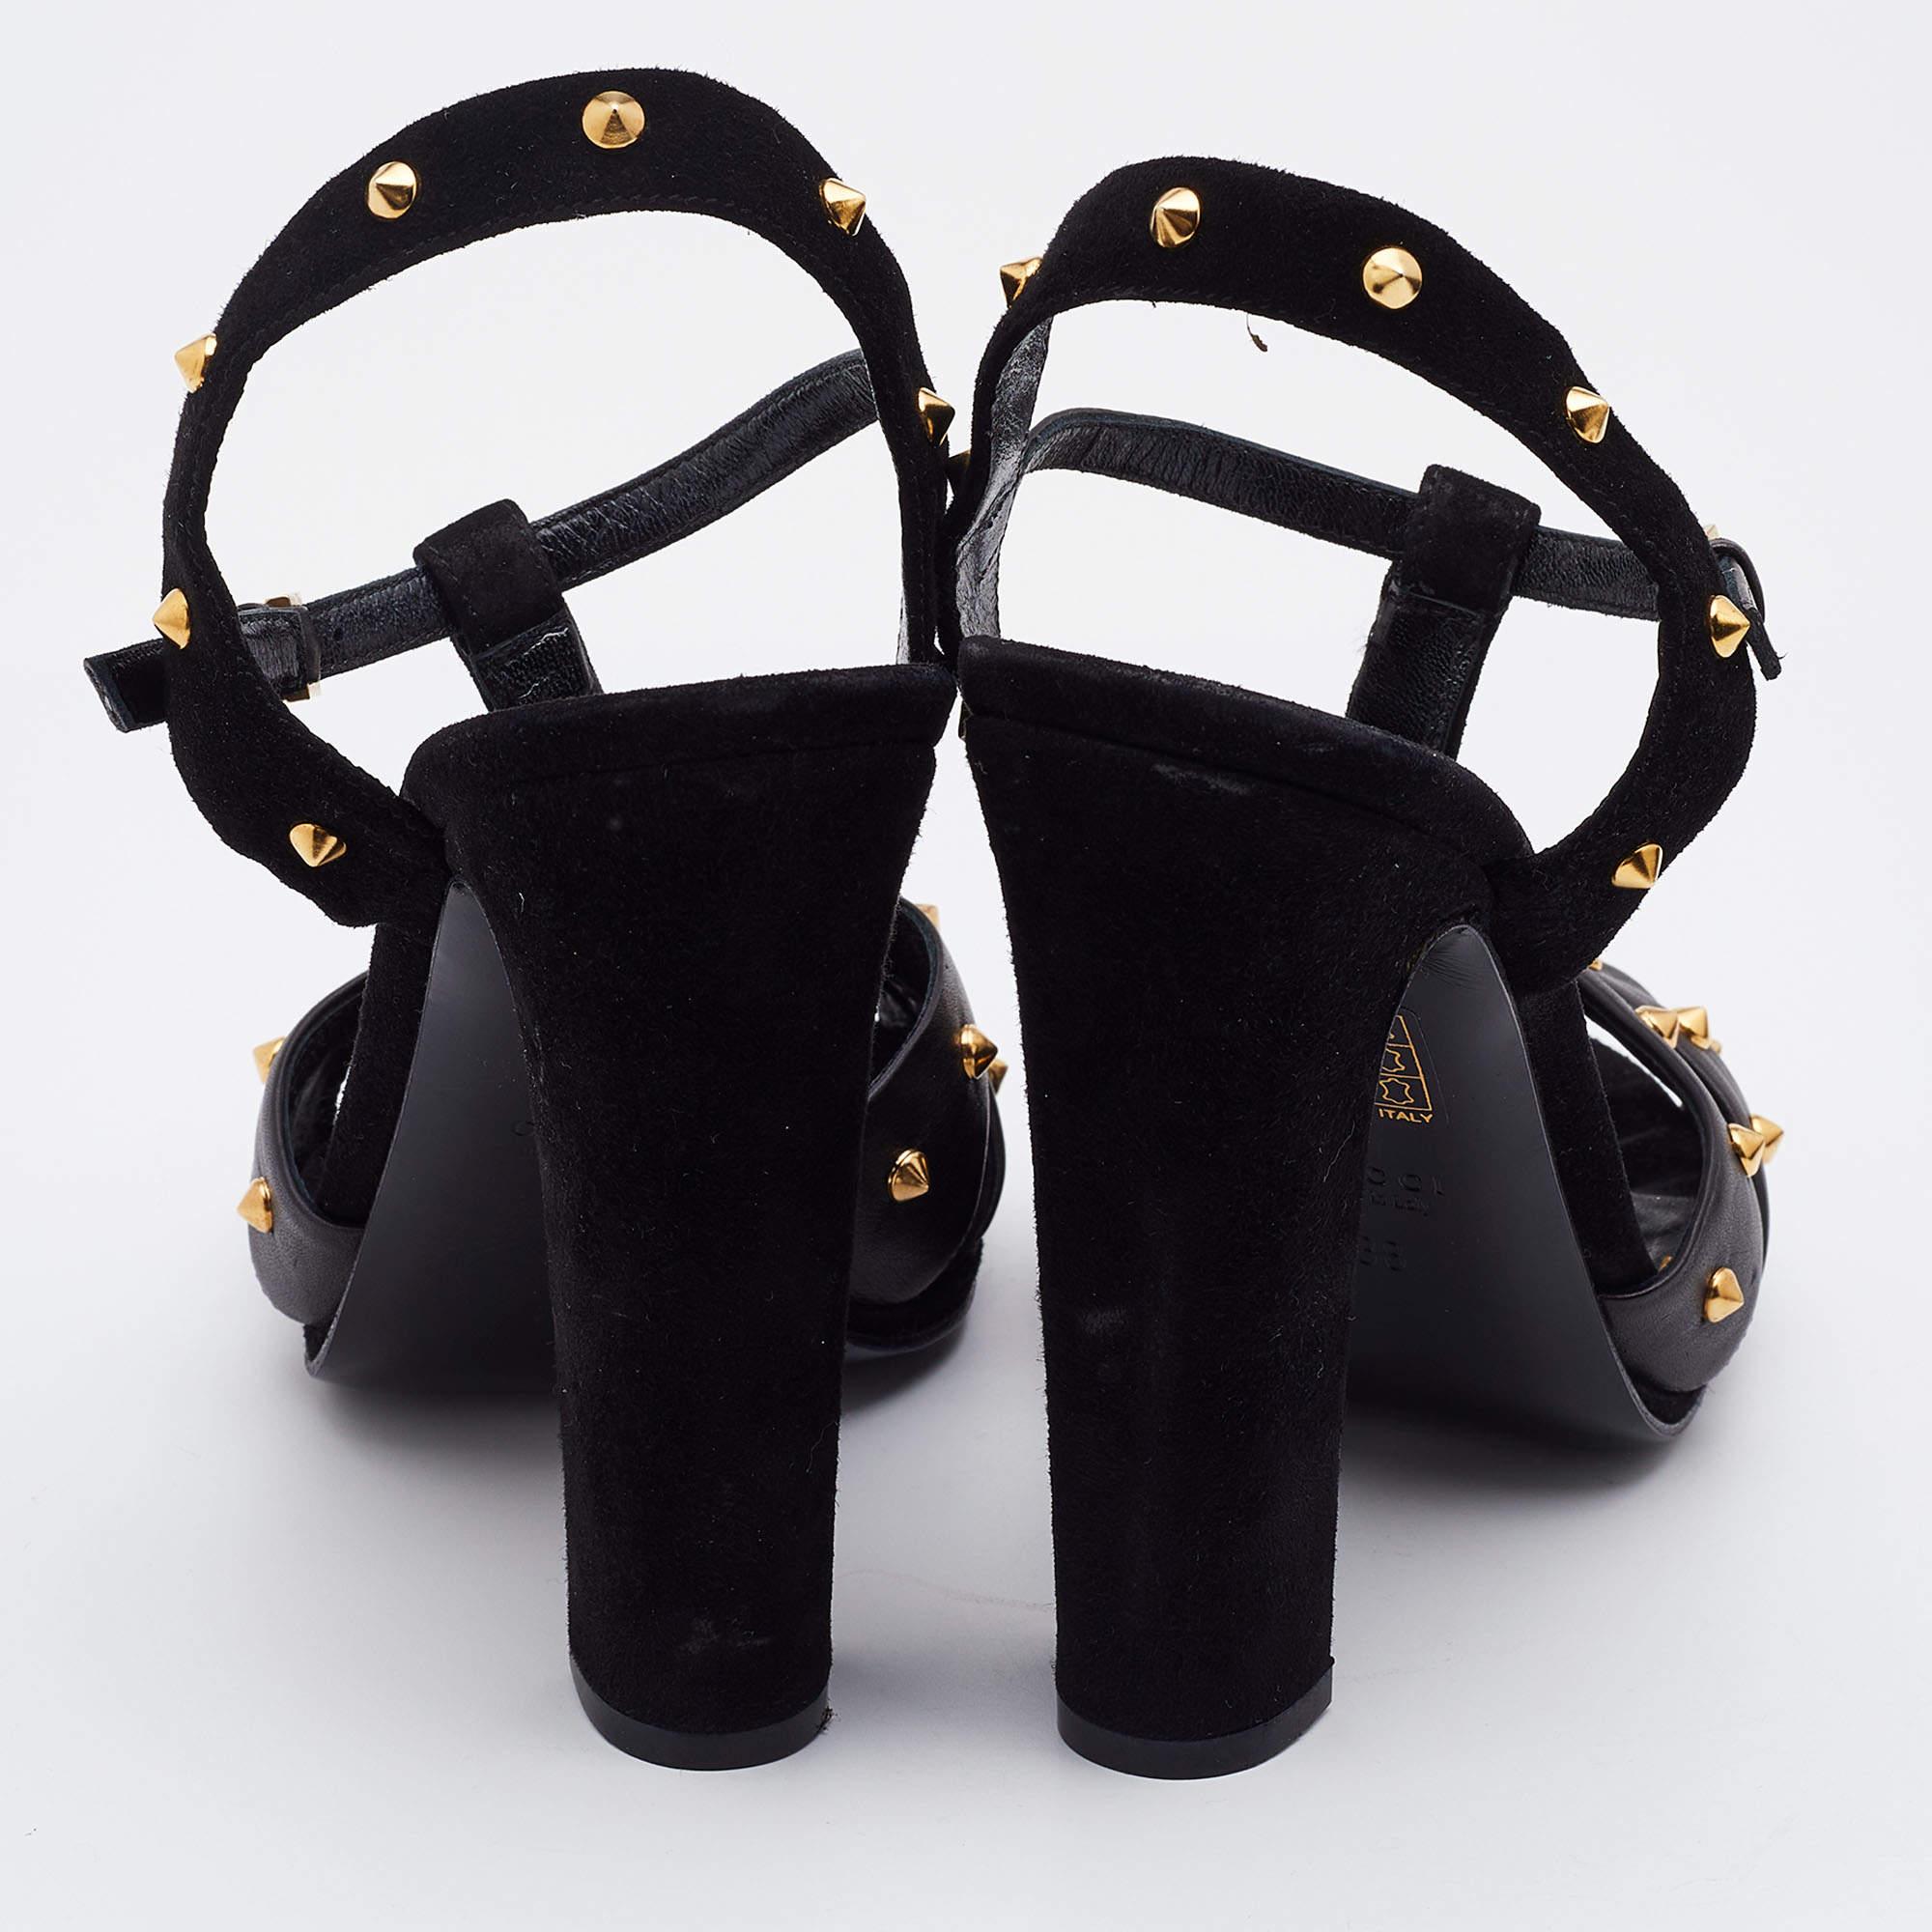 Gucci Black Suede and Leather Studded Ankle Strap Sandals Size 38 In Good Condition For Sale In Dubai, Al Qouz 2